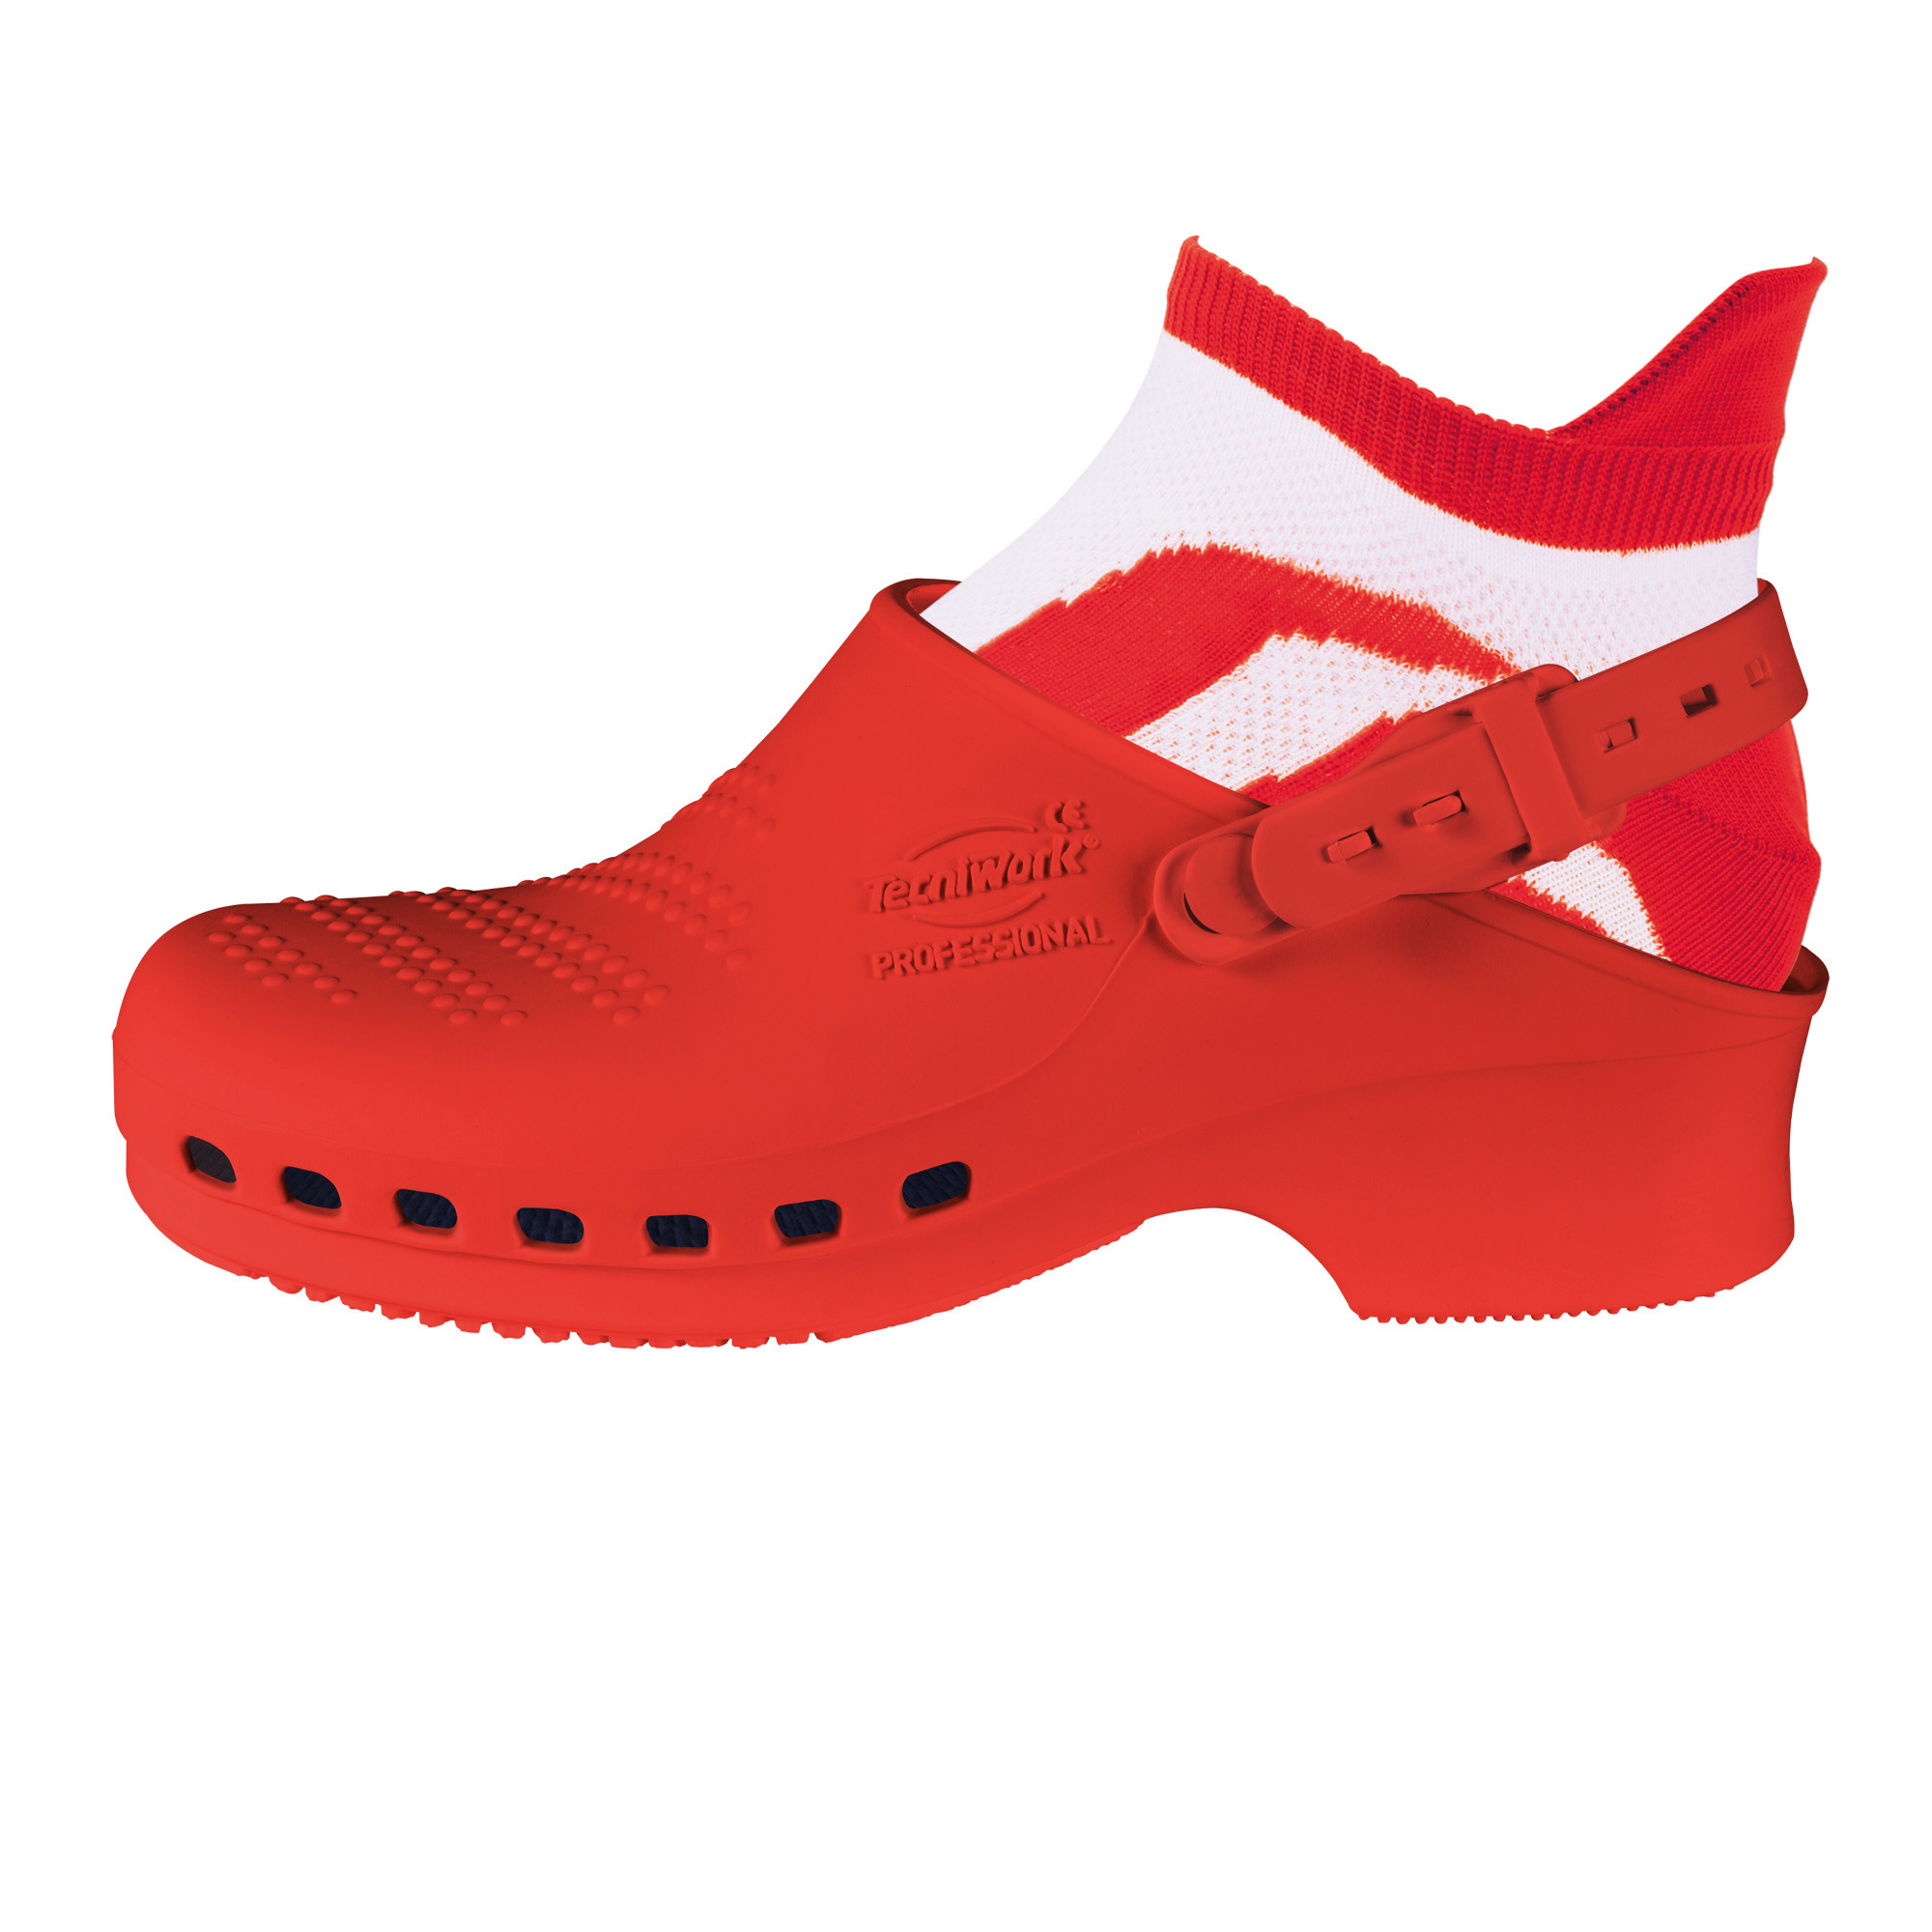 Professional sanitary clogs red Size 42/43